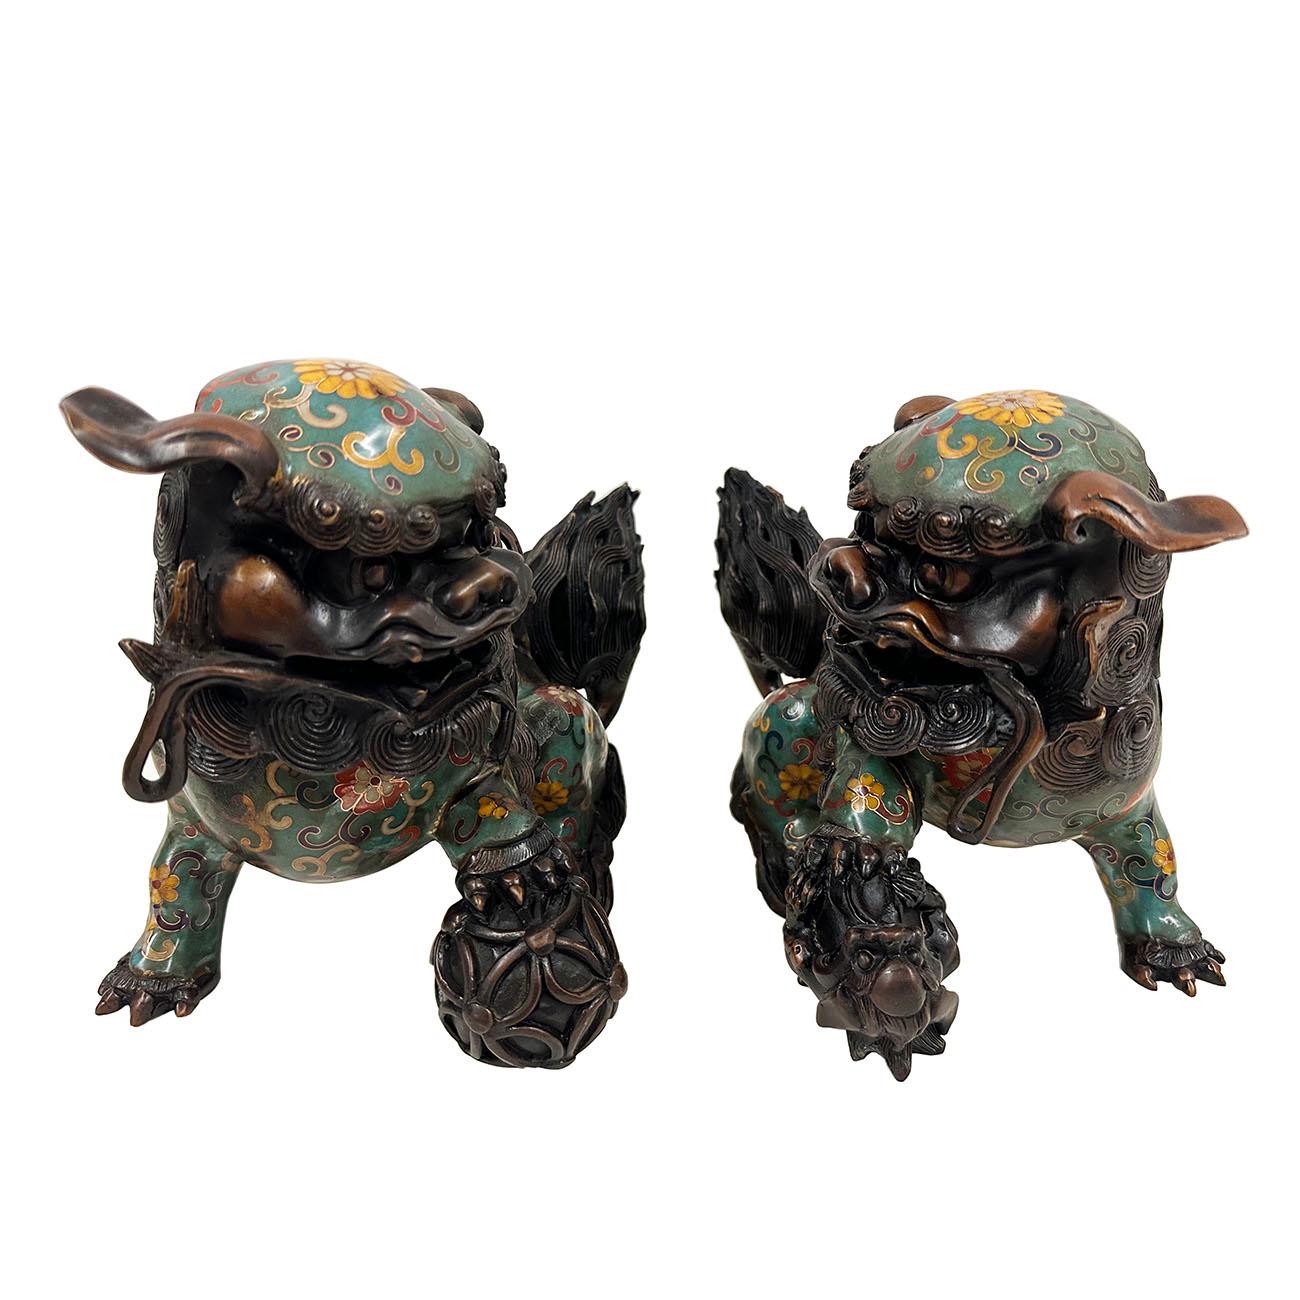 This pair of magnificent Chinese Cloisonné Foo Dog are the perfect decor pieces. With beautiful floral design, it is a majestically hand crafted work of art that is sure to capture everyone’s attention. Very beautiful. A lot of detailed art works on